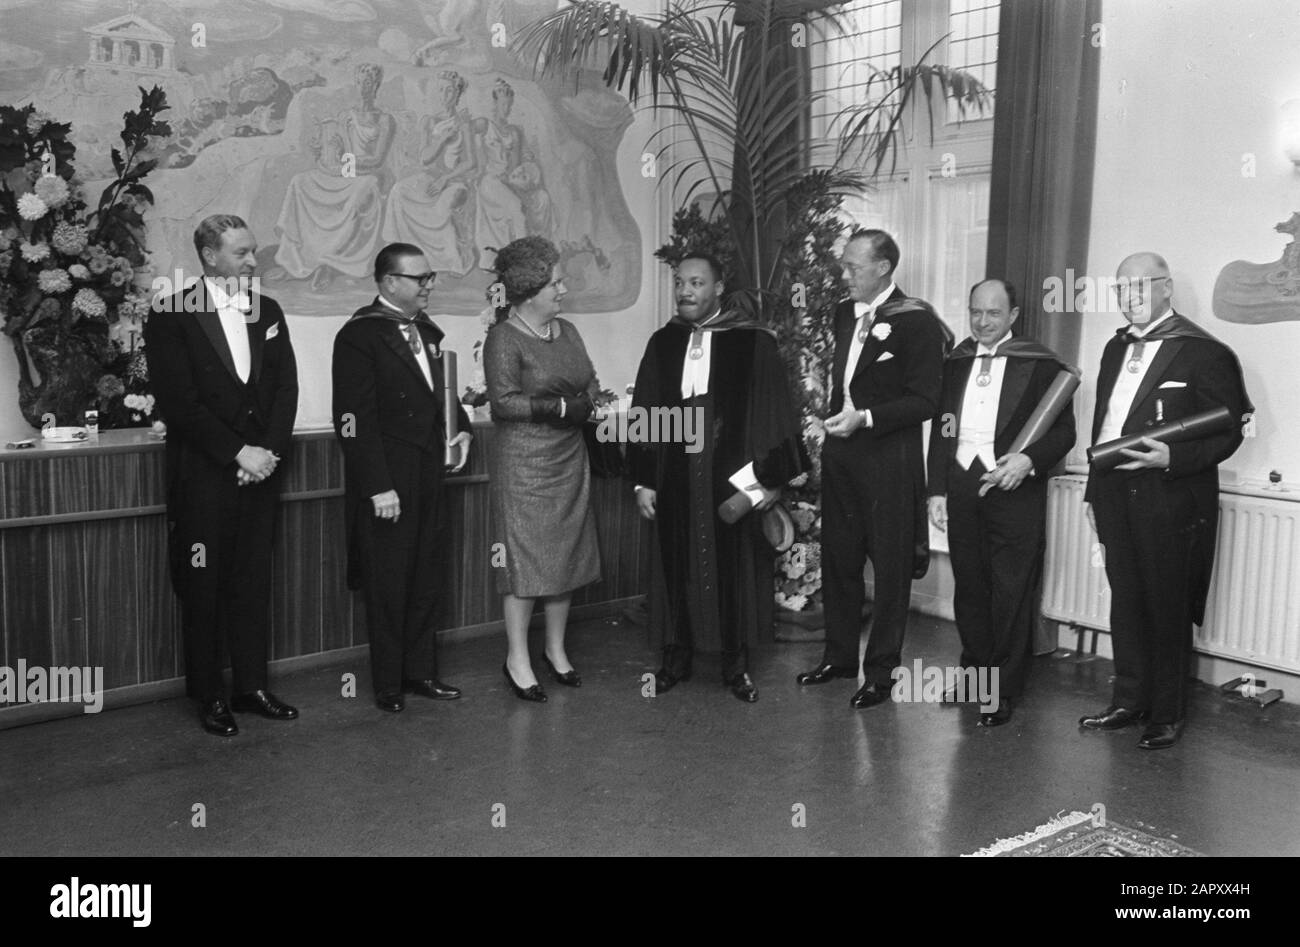 Honorary doctorates of the Free Univerity in the Concertgebouw in Amsterdam  V.l.n.r. W. Gibson Parker (as replacement of Paul G. Hoffman), E. Jonckheer, Queen Juliana, Dr. Martin Luther King, prince Bernhard, Prof. Dr. Jacques Ellul and C. Rijnsdorp Date: 20 October 1965 Location: Amsterdam, Noord-Holland Keywords: honorary doctorates, professors, ceremonies, princes Personal name: Bernhard (prince Netherlands), Ellul, Jacques, Jonckheer, E., Juliana (queen Netherlands), King, Martin Luther Stock Photo